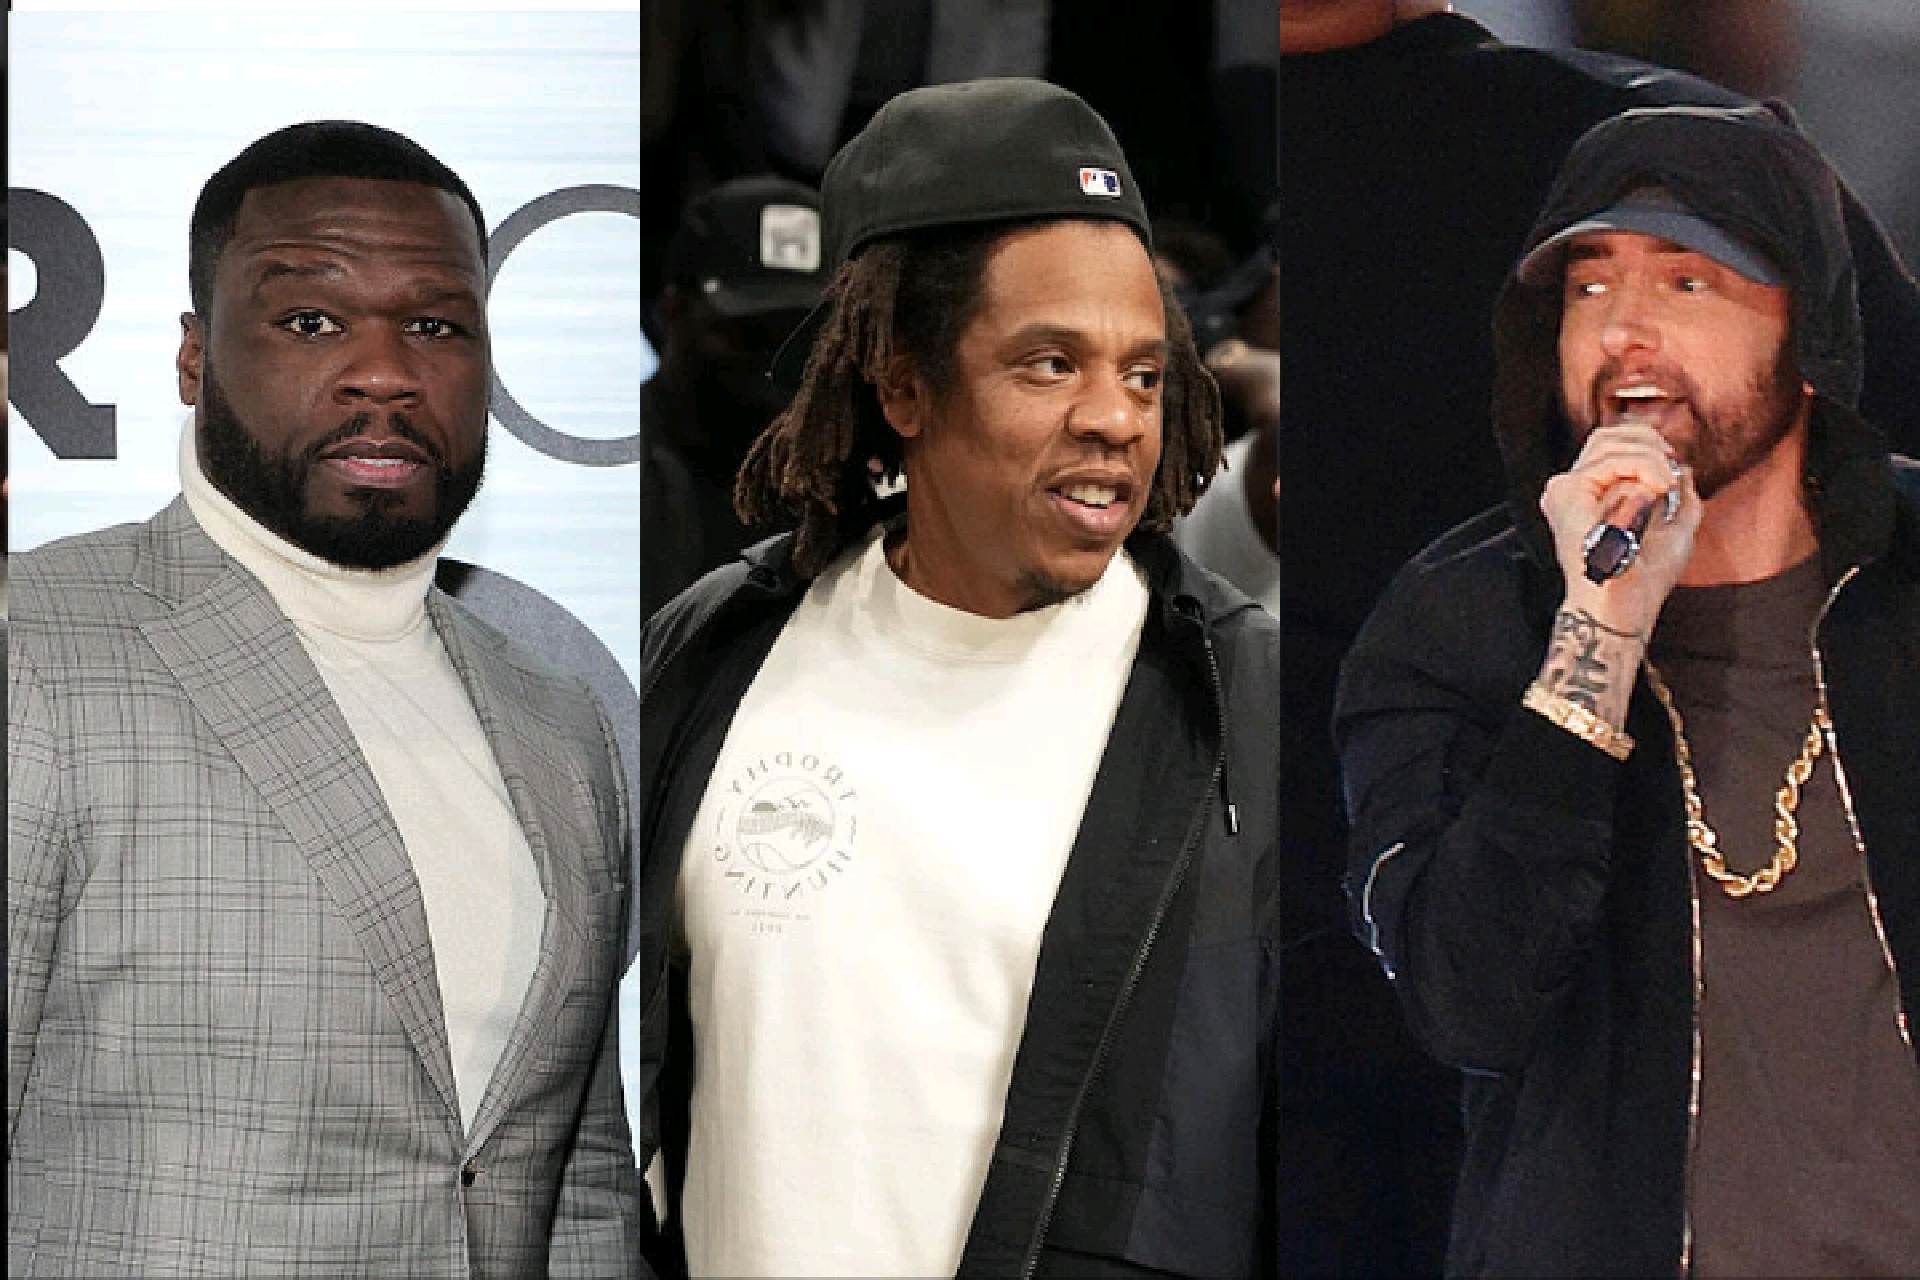 50 Cent Don't Believe Jay-Z's Impact Is Bigger Than Eminem